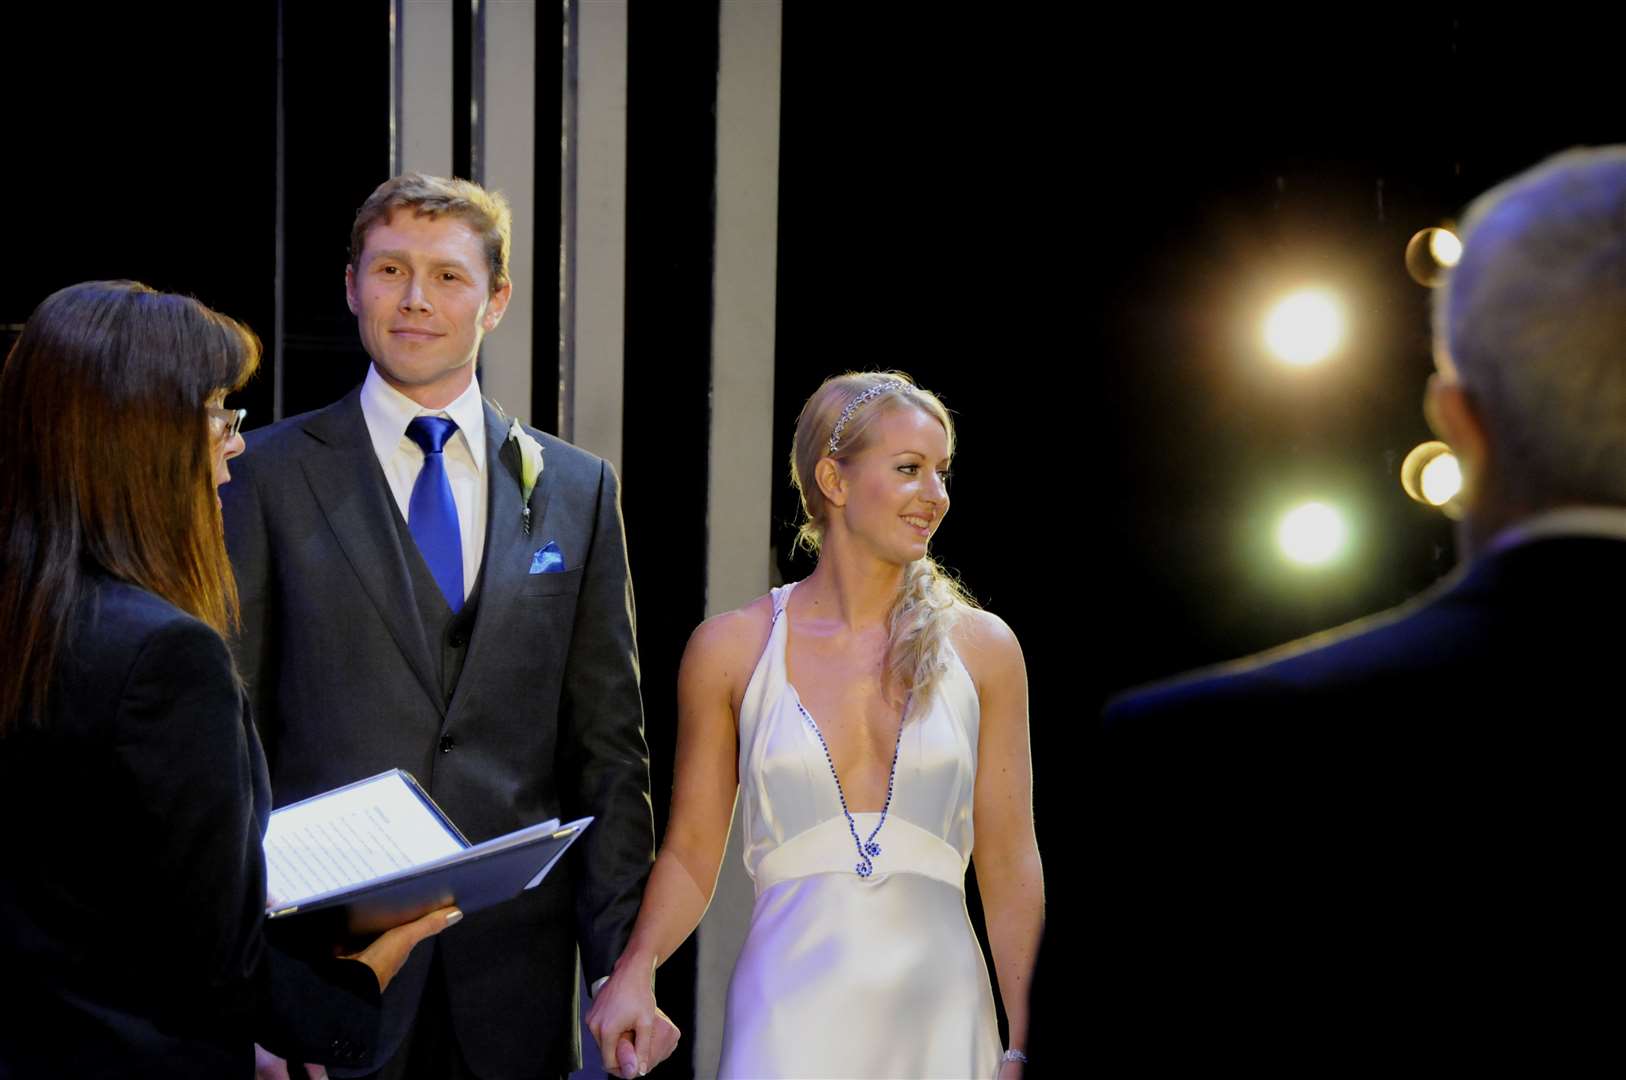 The theatre's first wedding was held in November 2011, with husband and wife Hayley Mills and Lewin Hynes tying the knot